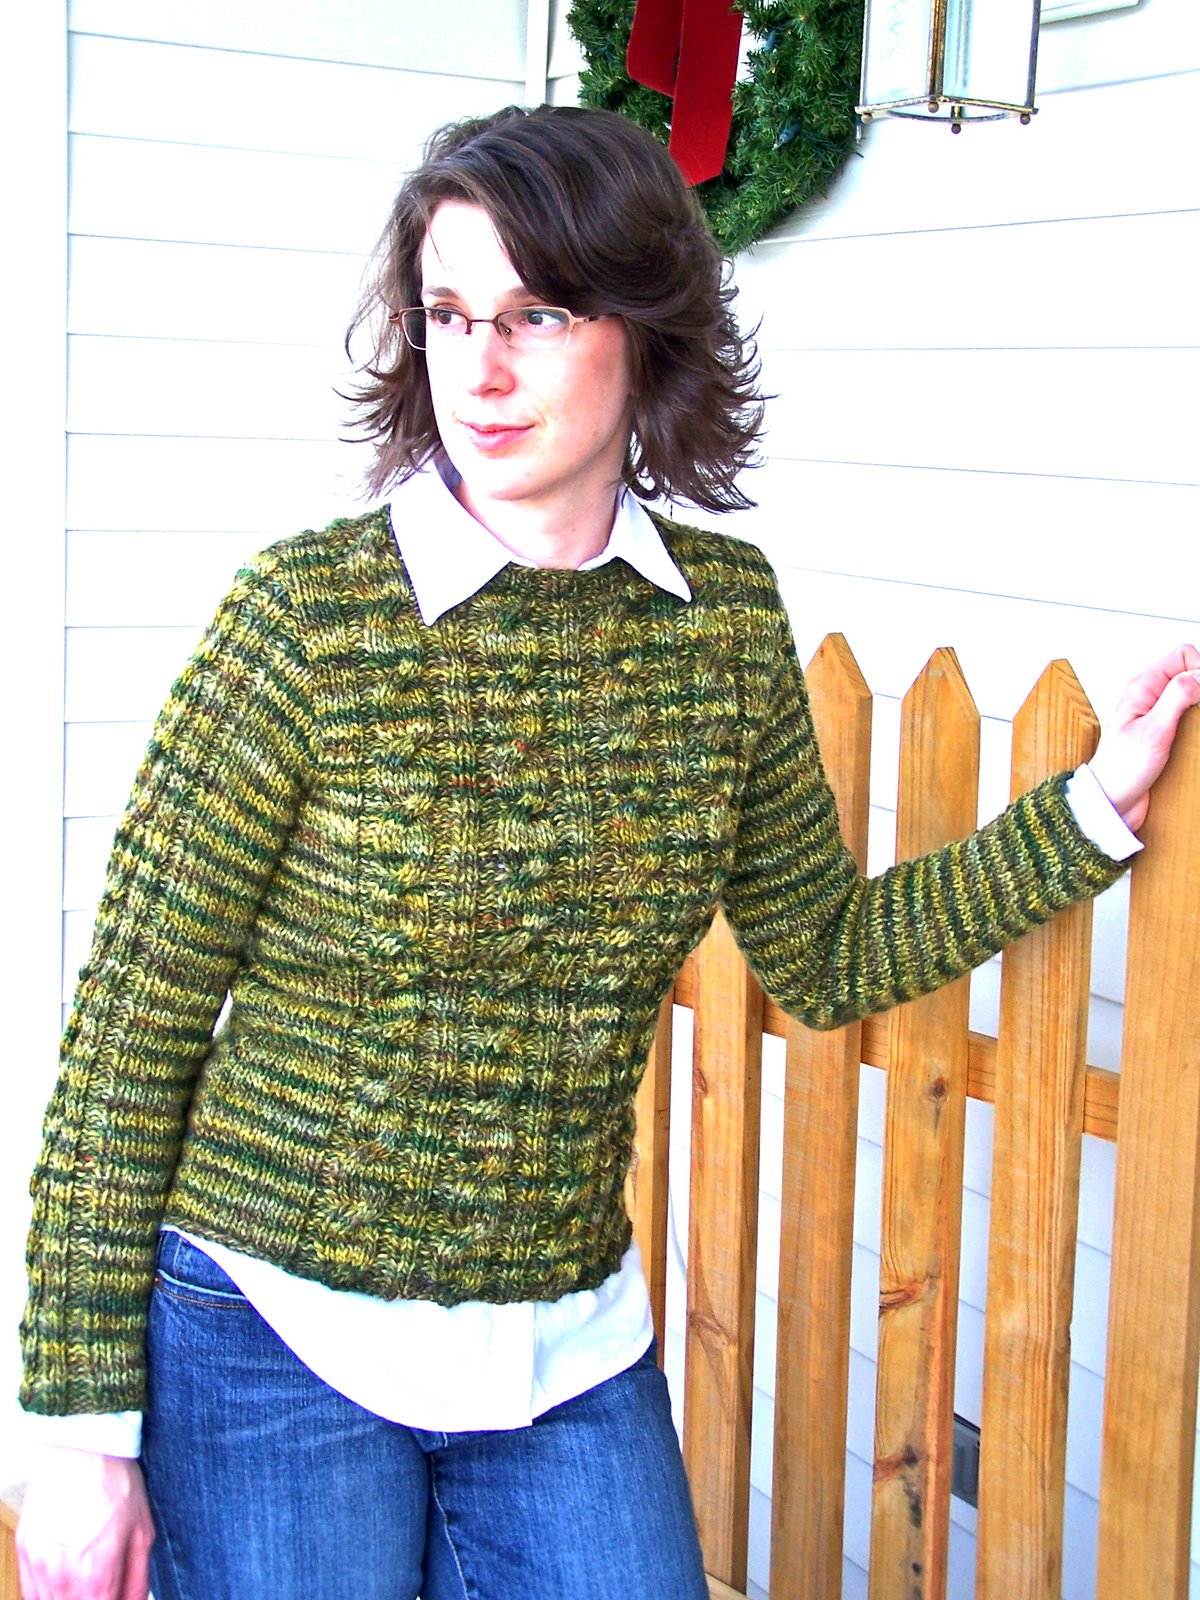 [2006-12-17,+Green+Cable+Sweater.jpg]